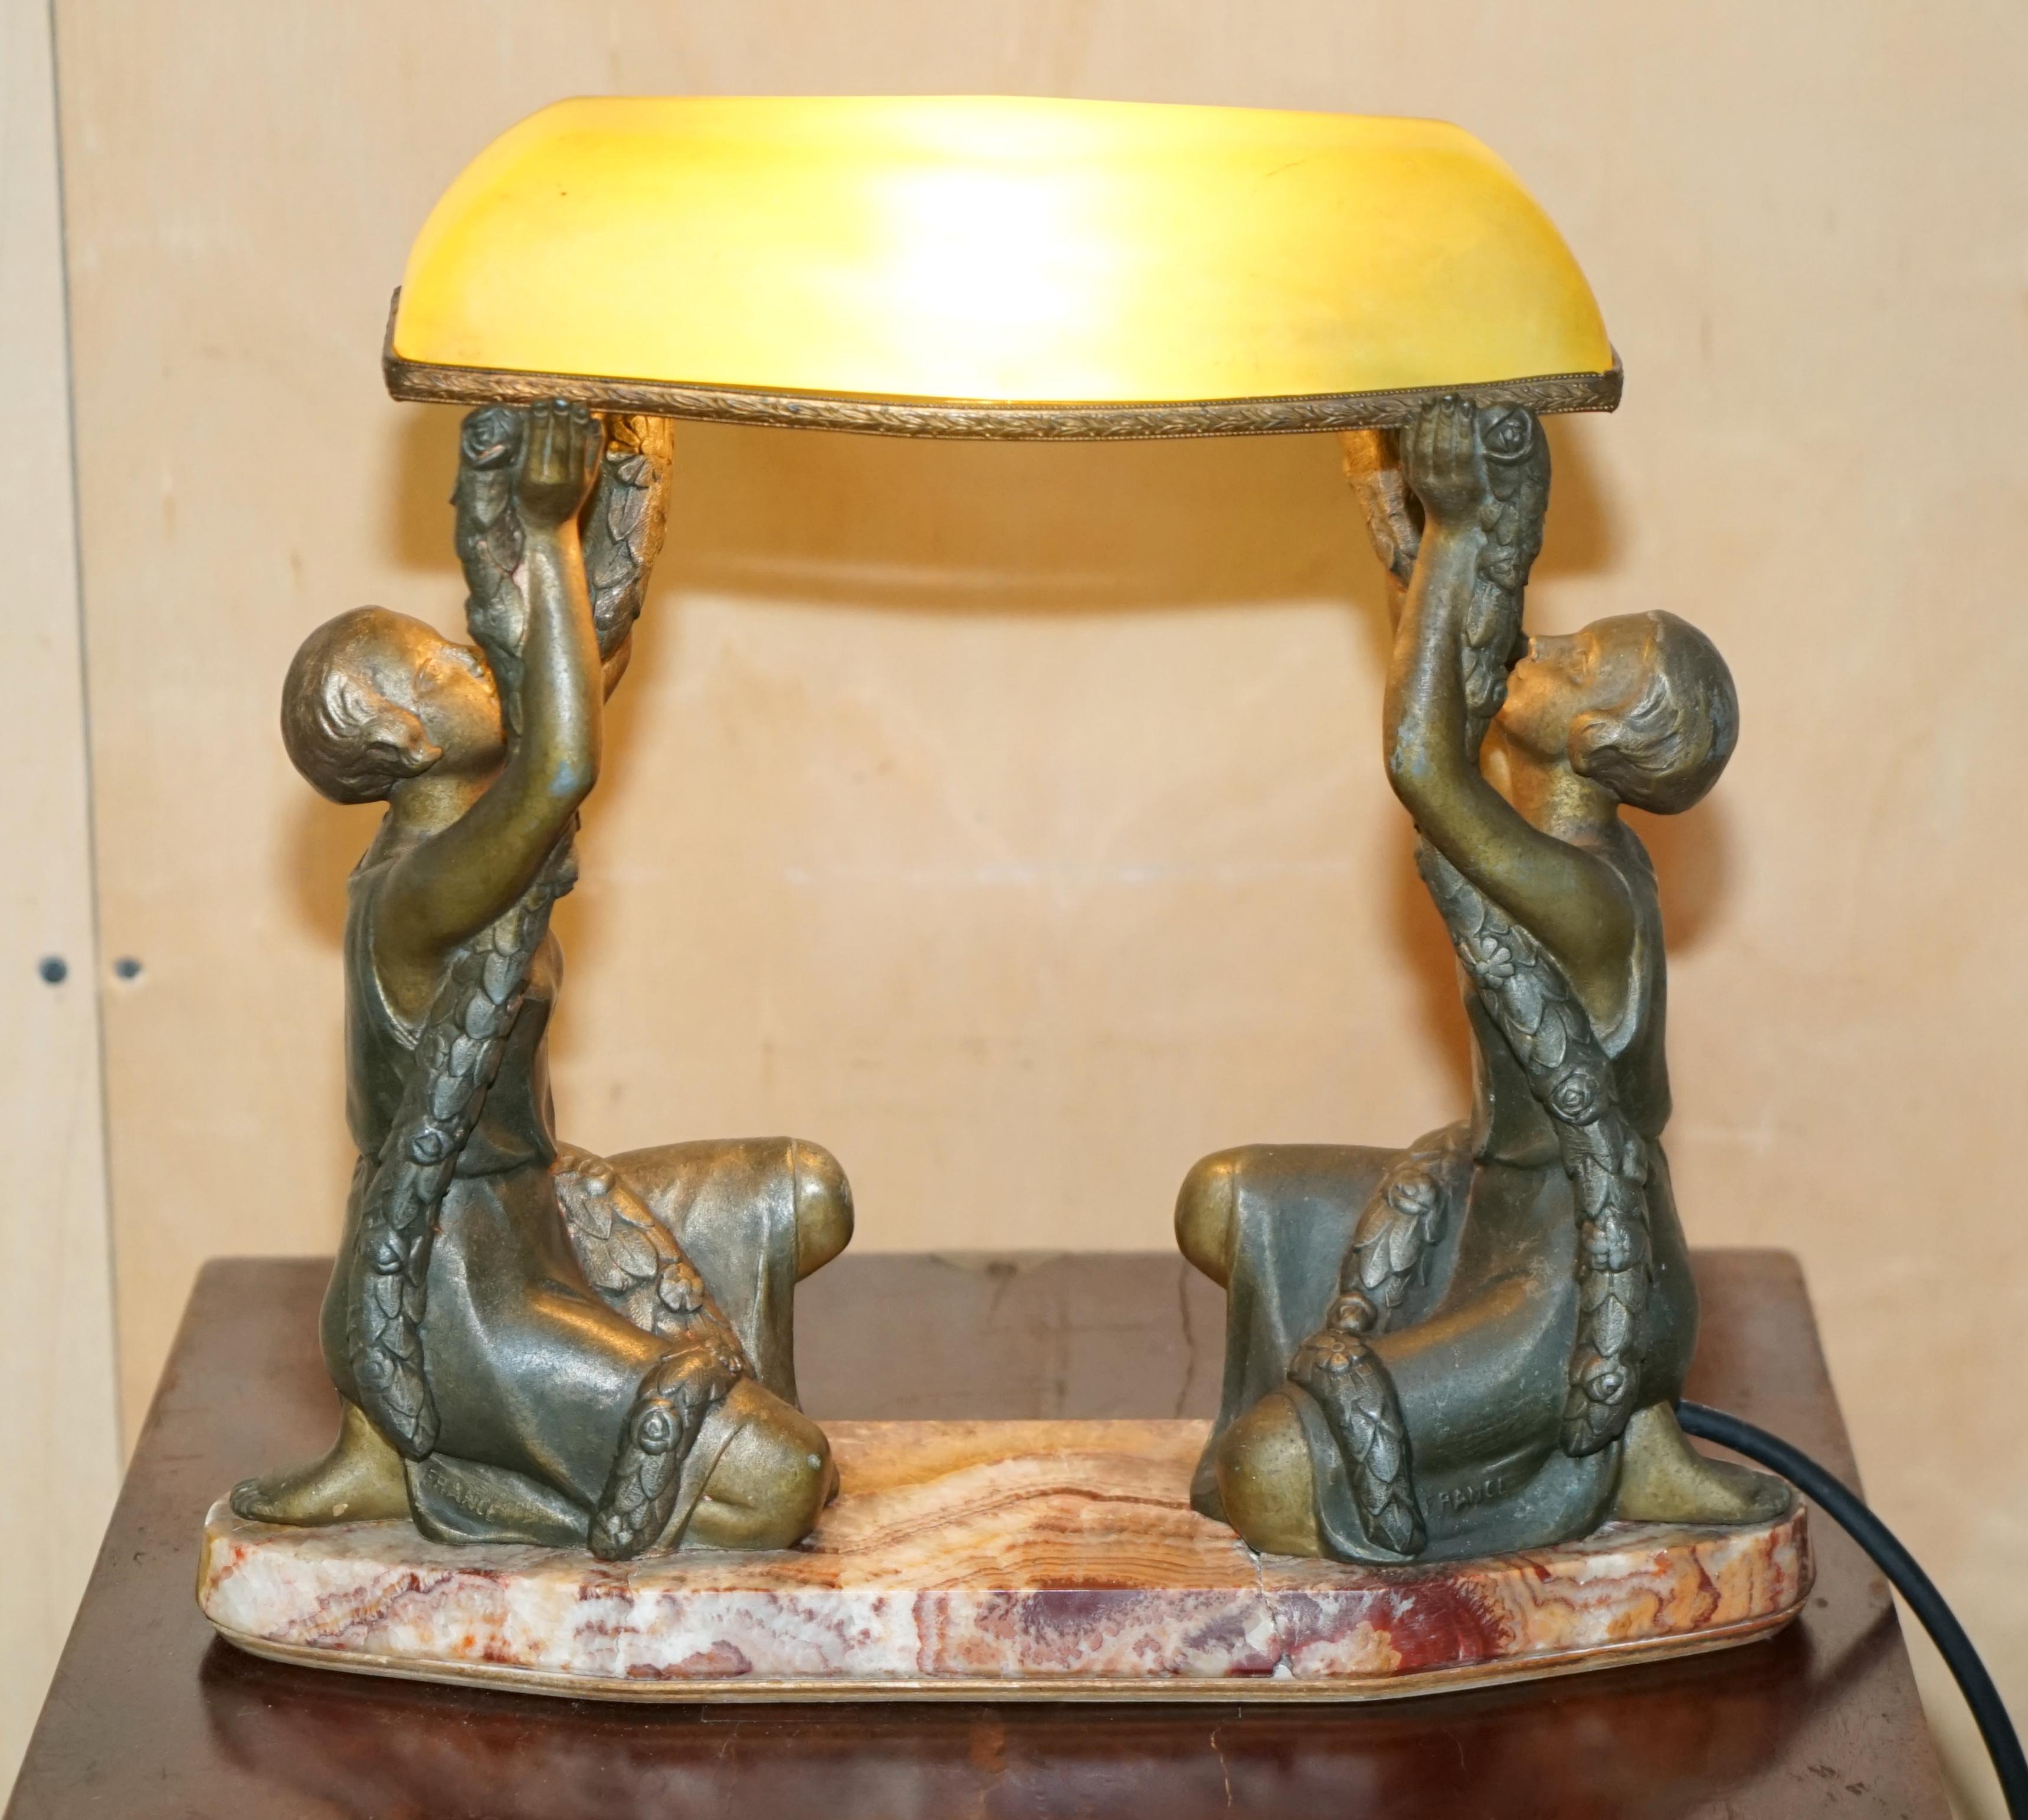 Royal House Antiques

Royal House Antiques is delighted to offer for sale this absolutely stunning, very rare original cold painted Bronze, French Art Deco table lamp period patina 

A very good looking rare and decorative table lamp, I've never